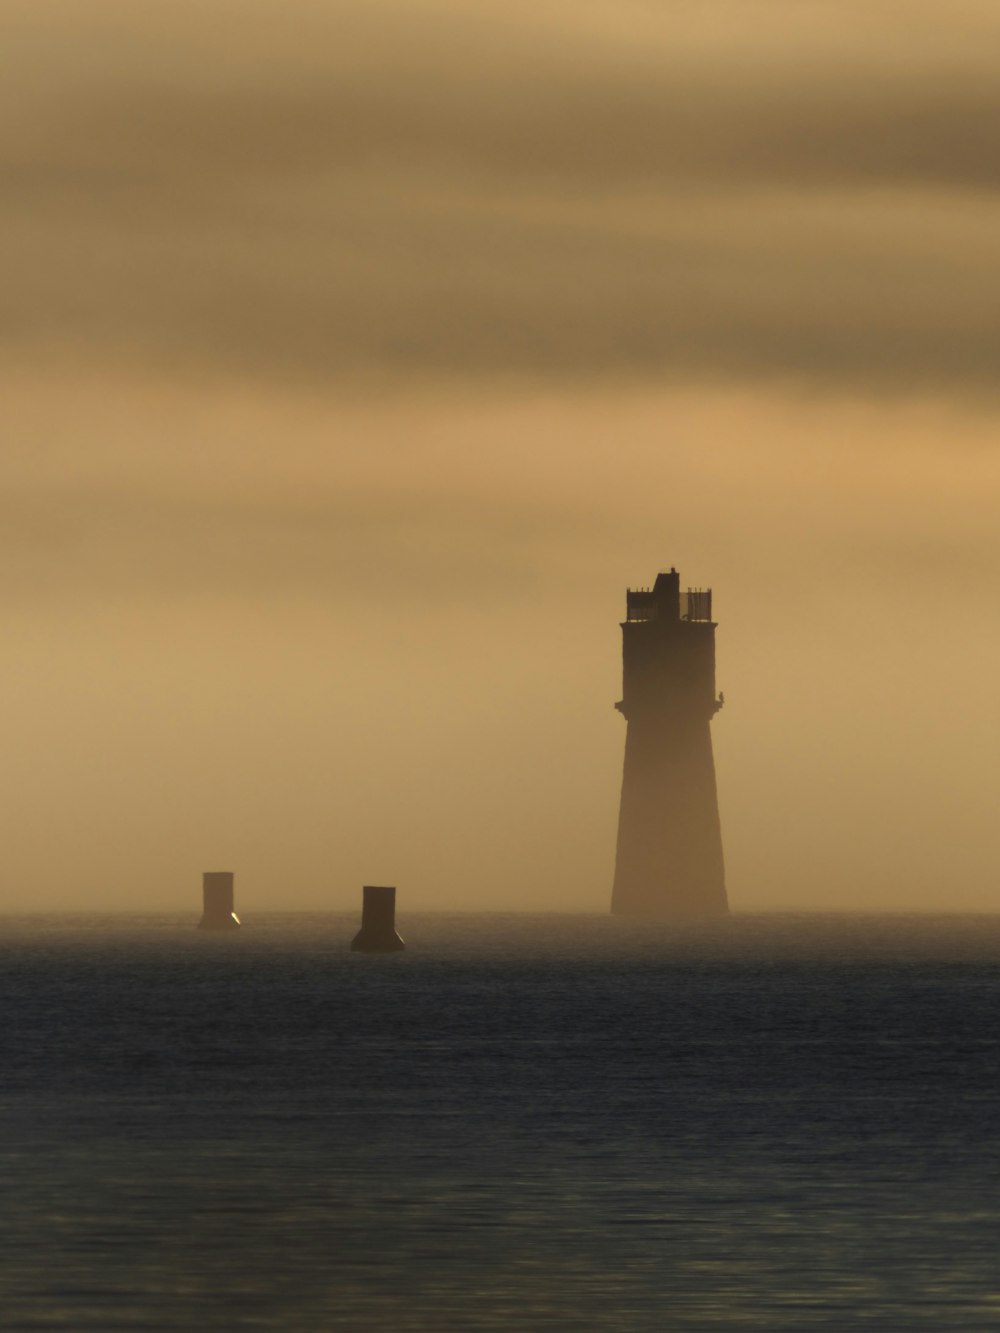 a light house in the middle of the ocean on a foggy day